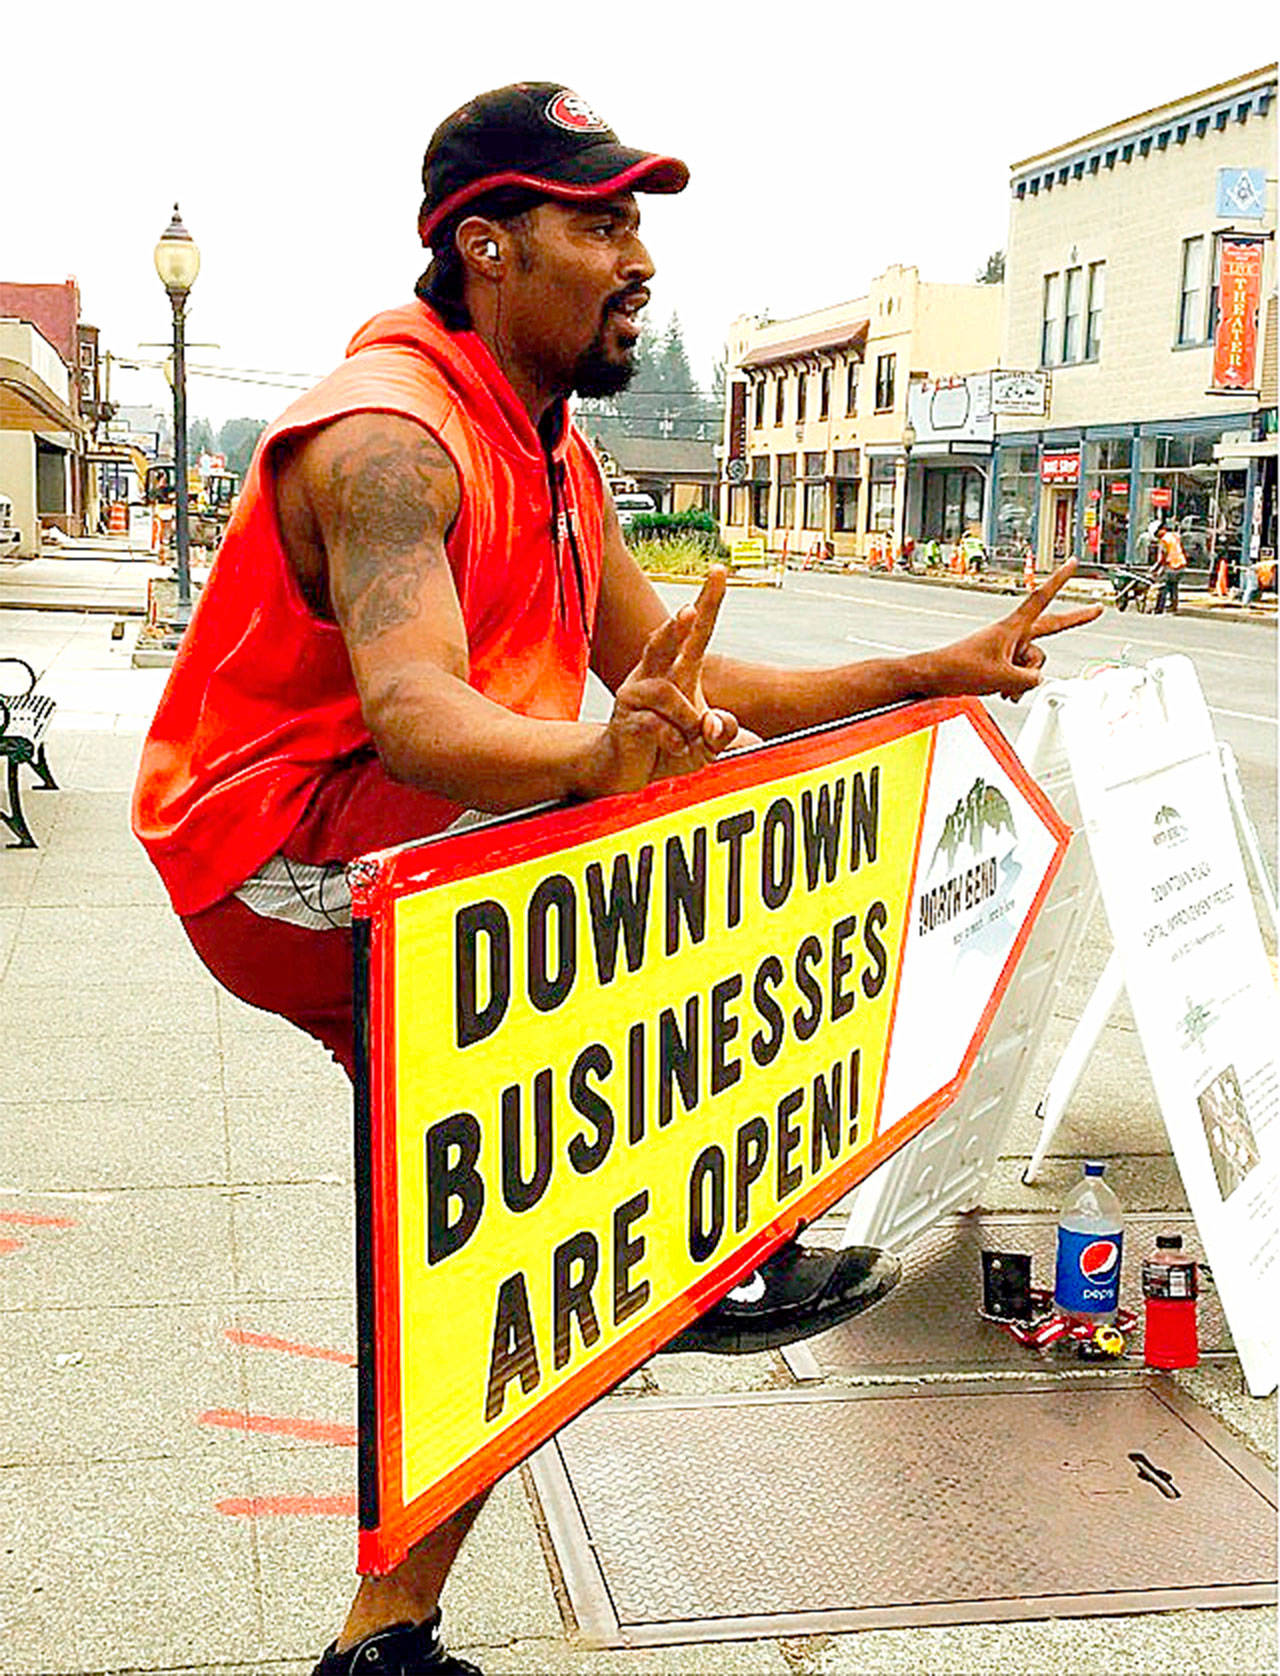 Sign spinner advertises for downtown North Bend businesses, affected by construction work